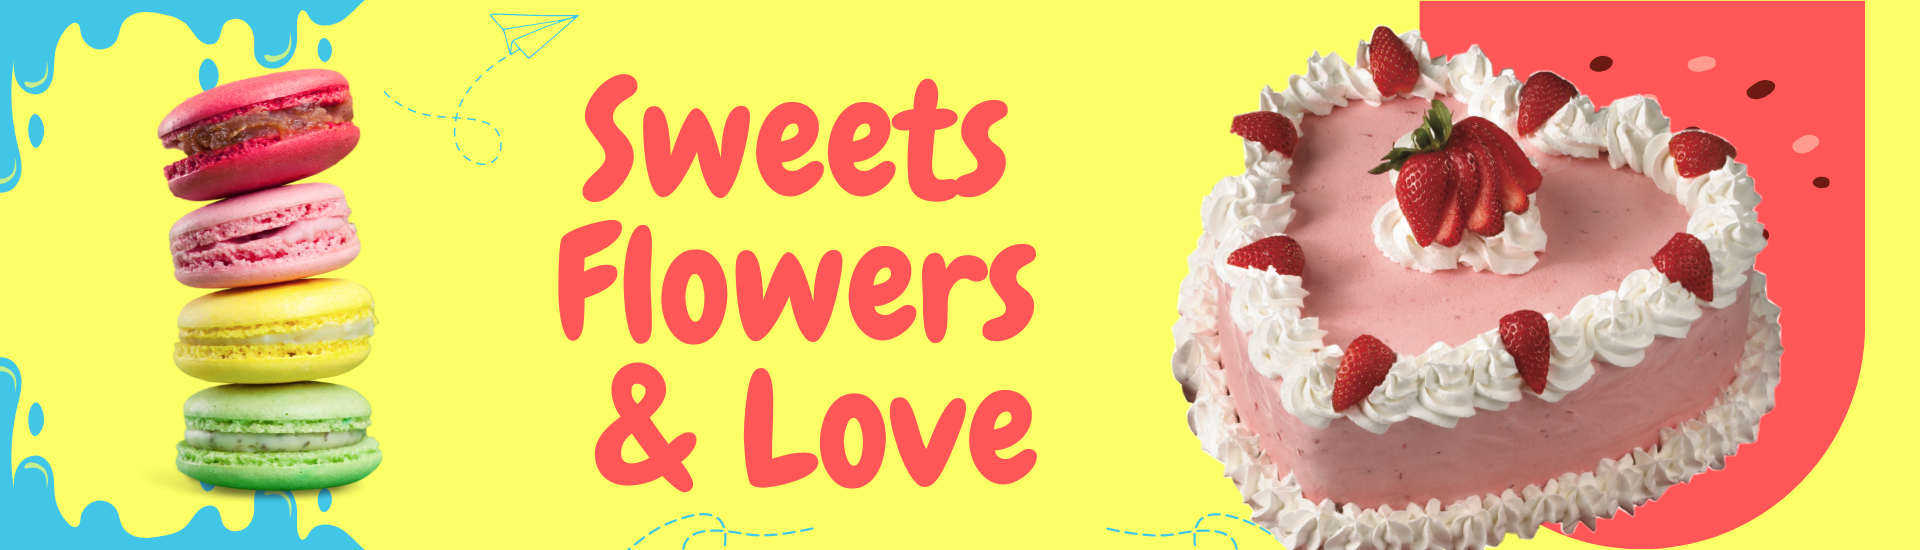 Sweets  Flowers  & Love VN